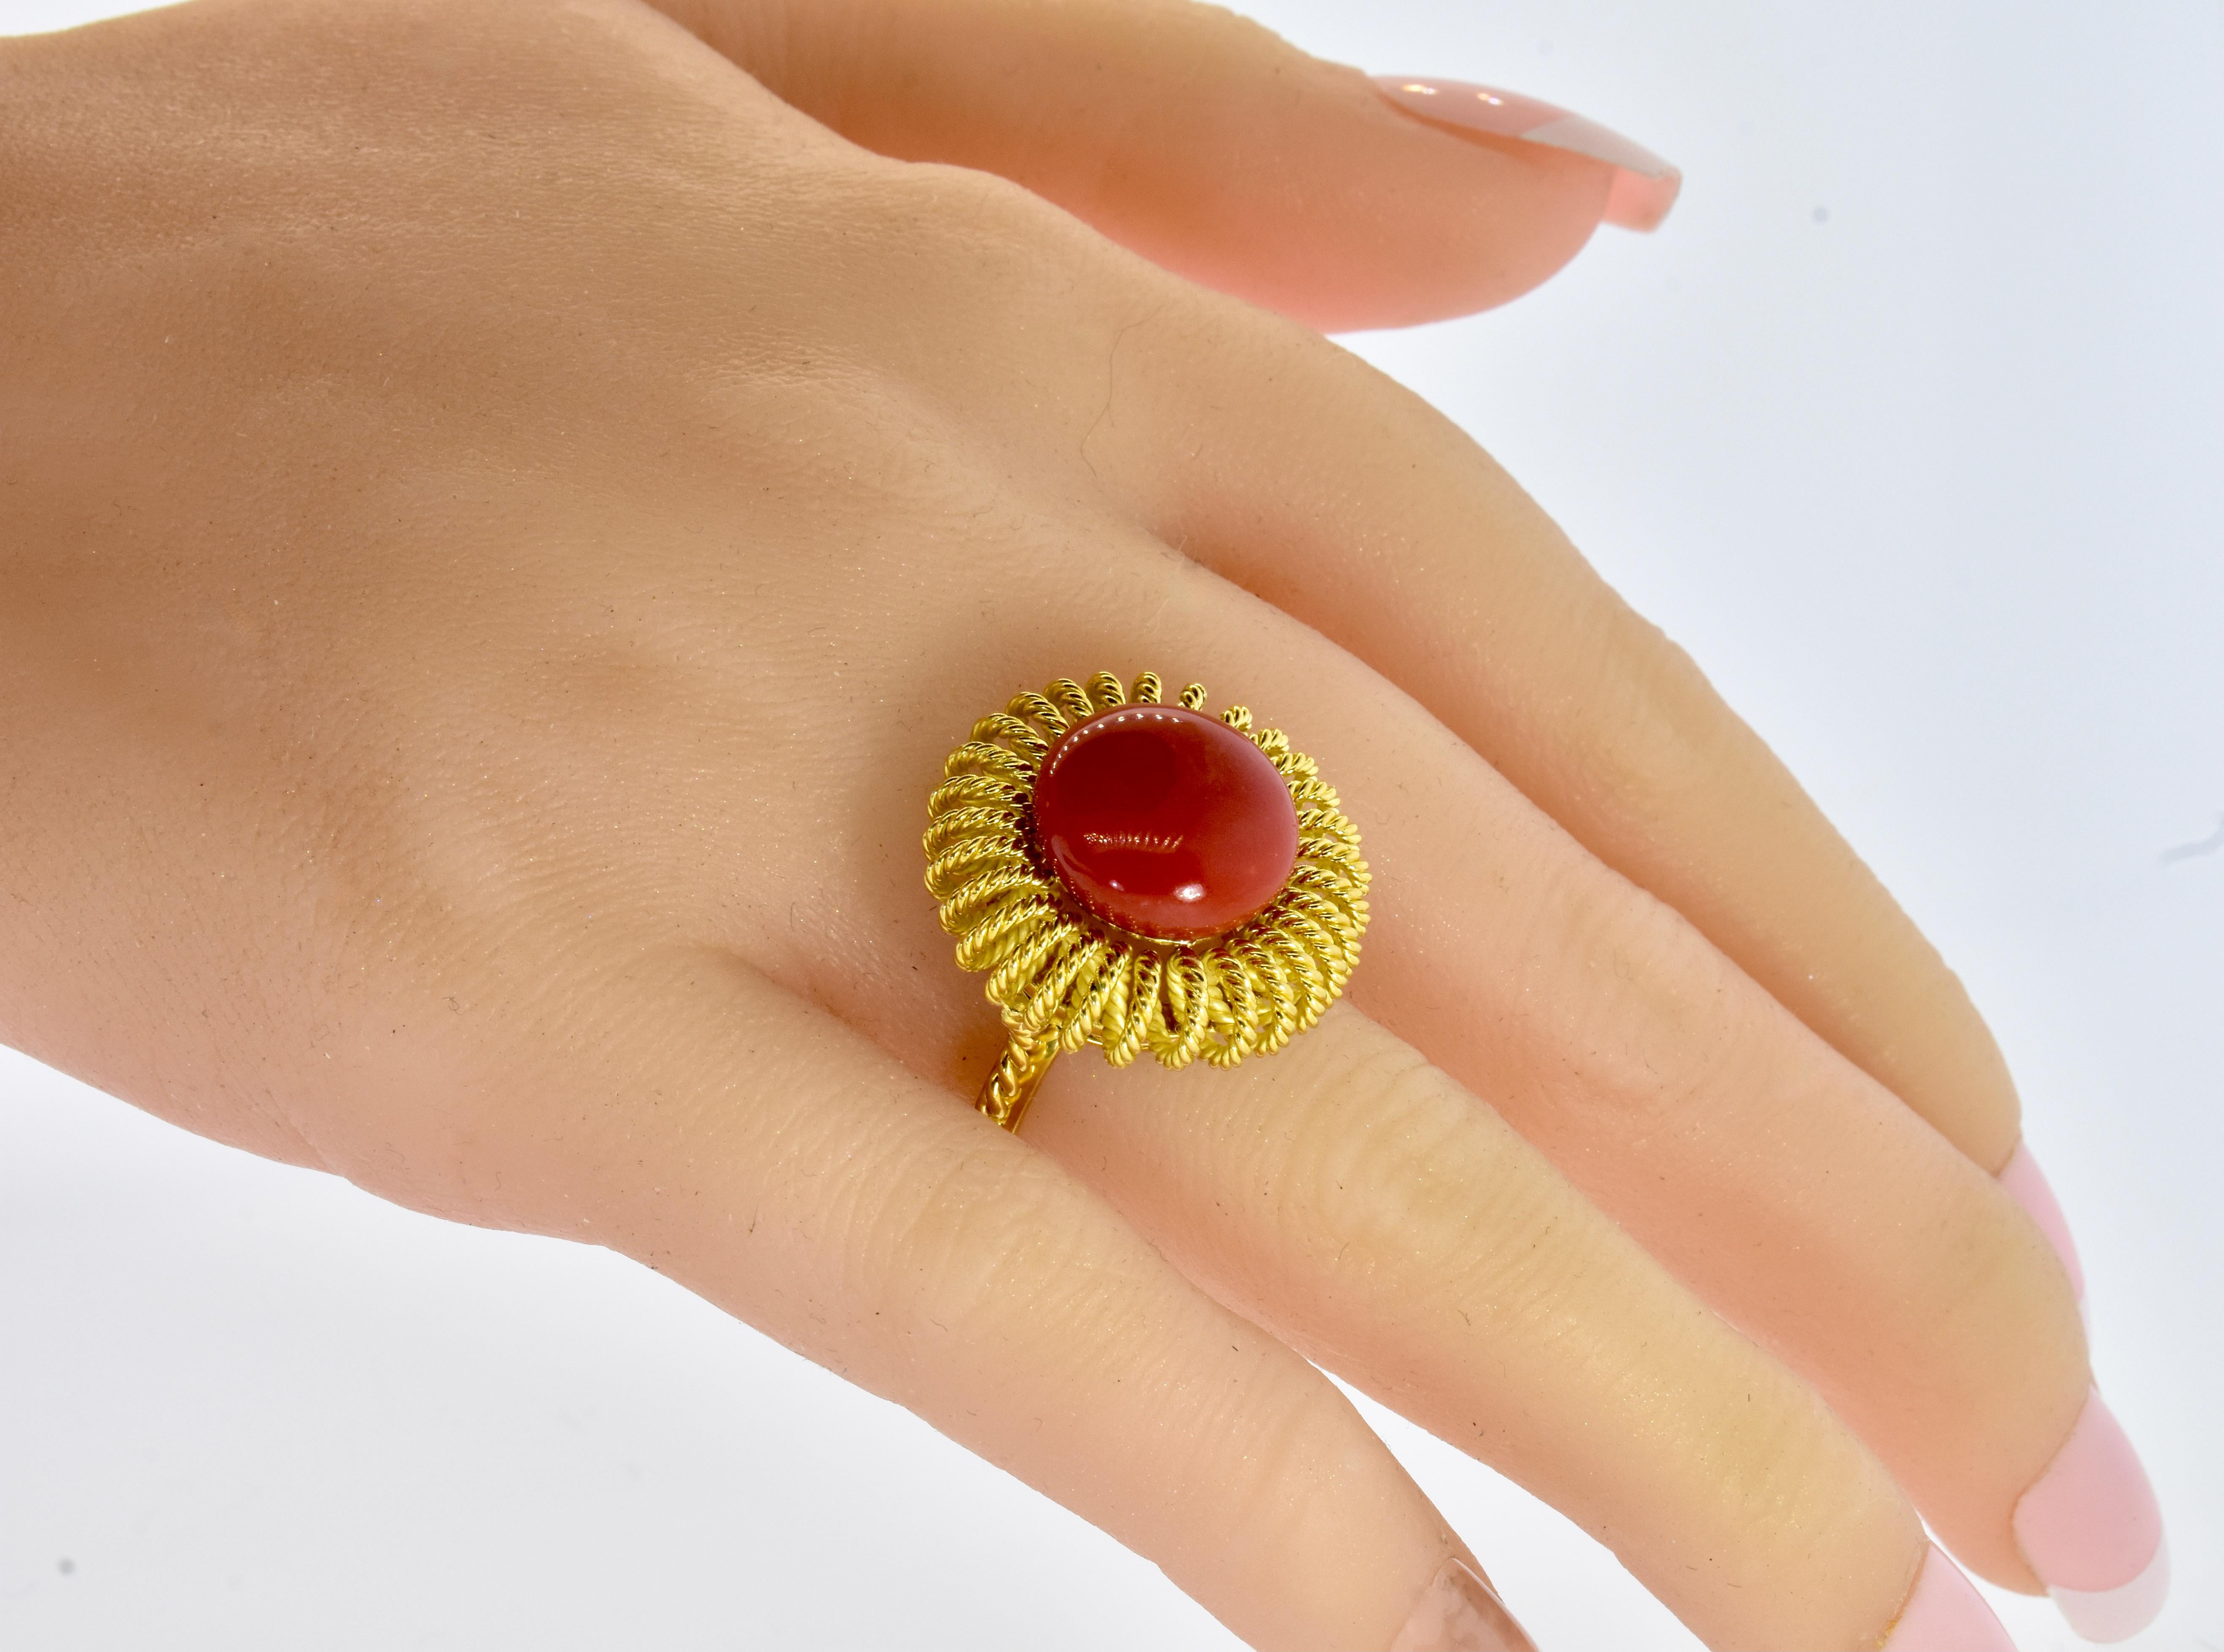 Oxblood red coral and 18K yellow gold vintage ring centering a 14.3 mm. button coral.
The 18K yellow gold ring weighs 17.9 grams, the ring manifest a color that is extremely difficult to find in the market.  In fact, this particular  stone are as